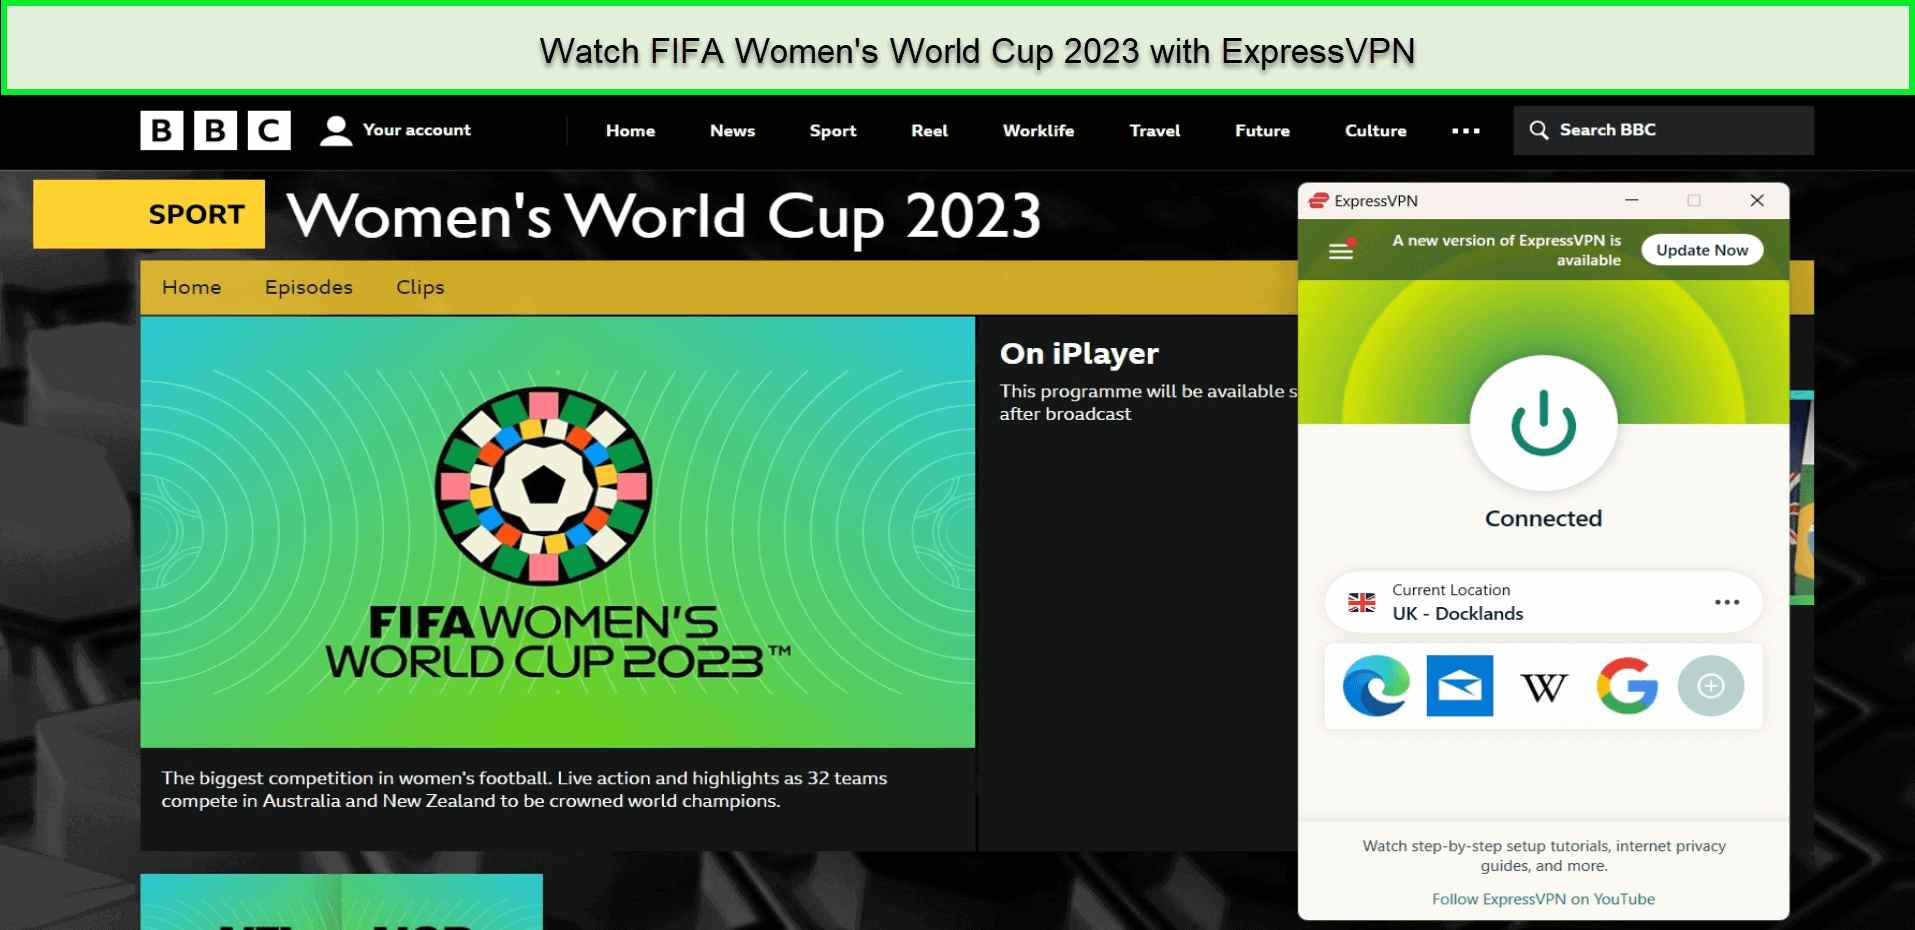 Unblock and Watch-FIFA-Womens-World-Cup-2023-in-UAE-on-BBC-iPlayer-with-ExpressVPN 